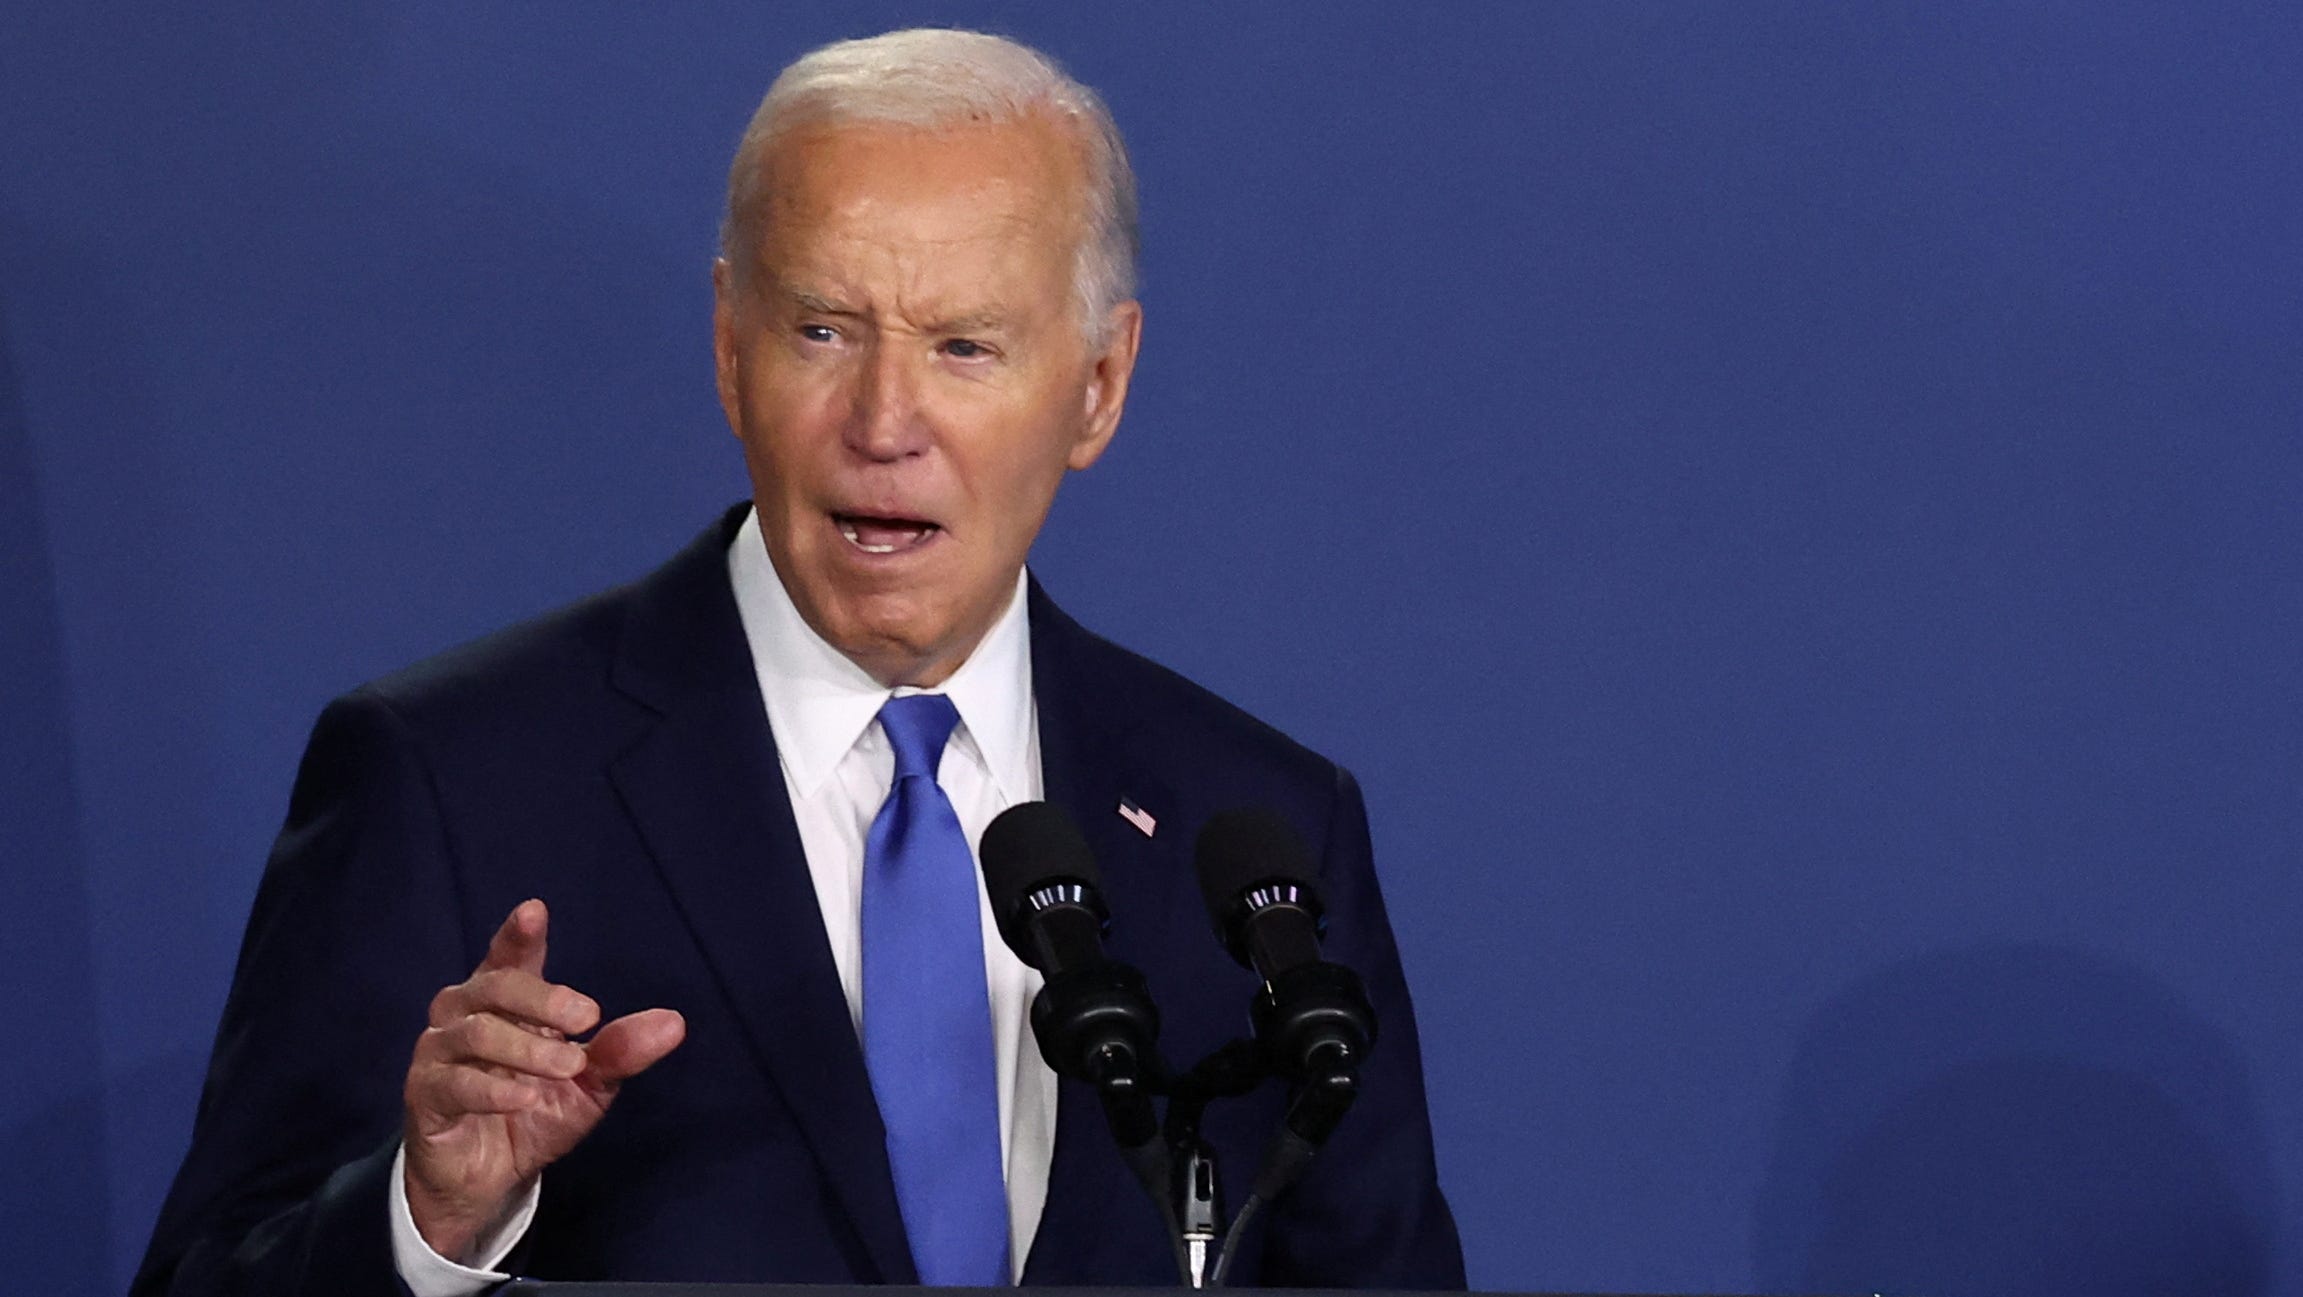 'Finish this job': 5 takeaways from Biden's NATO news conference